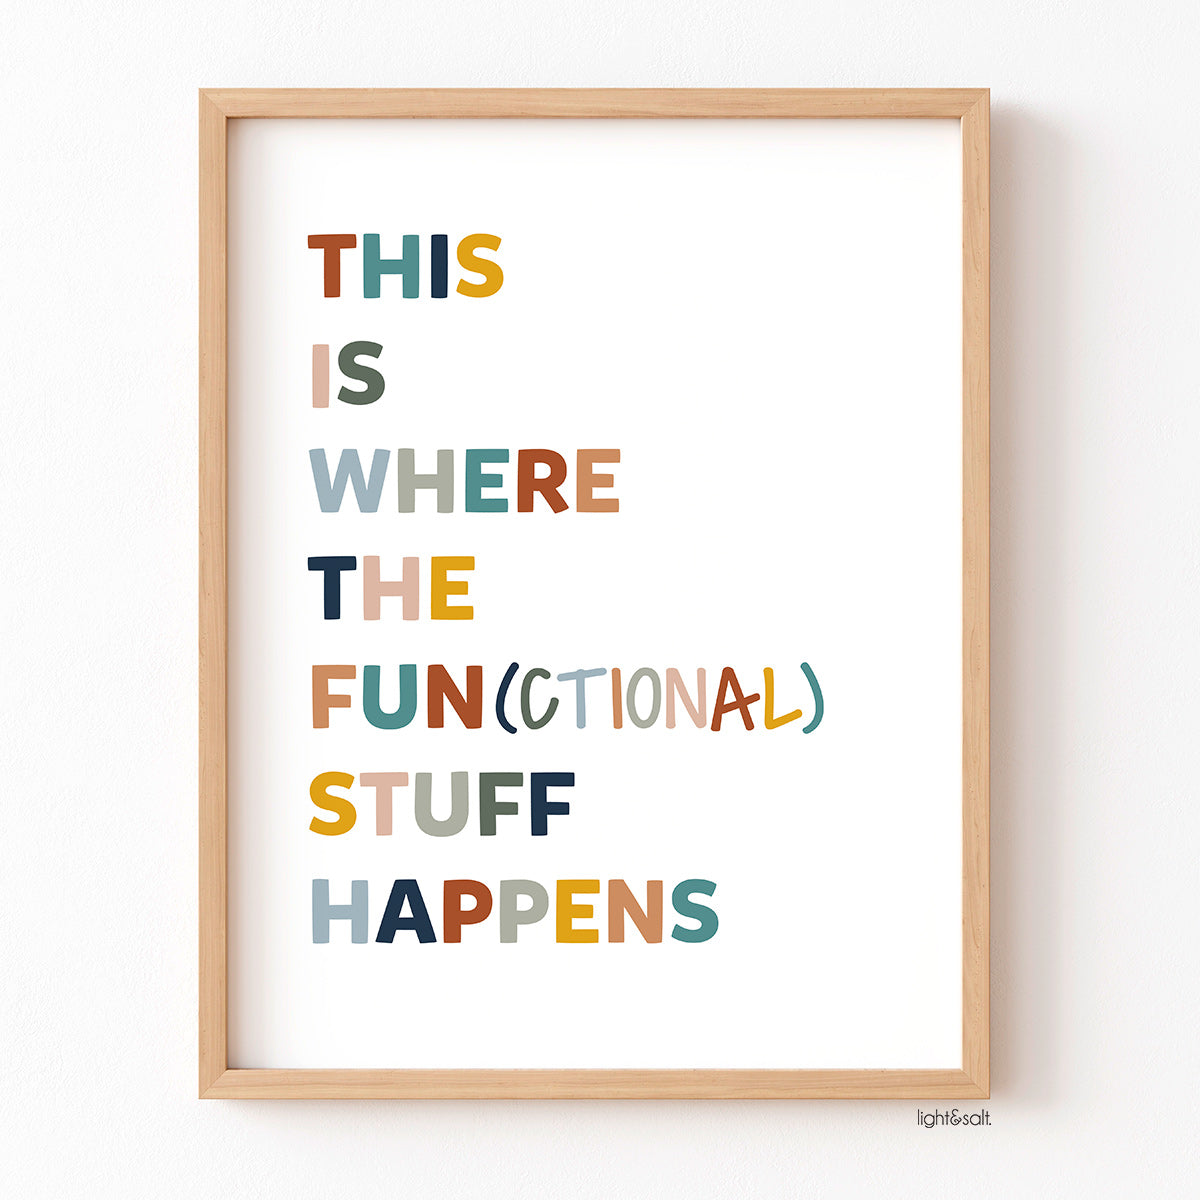 This is where the fun(ctional) stuff happens poster